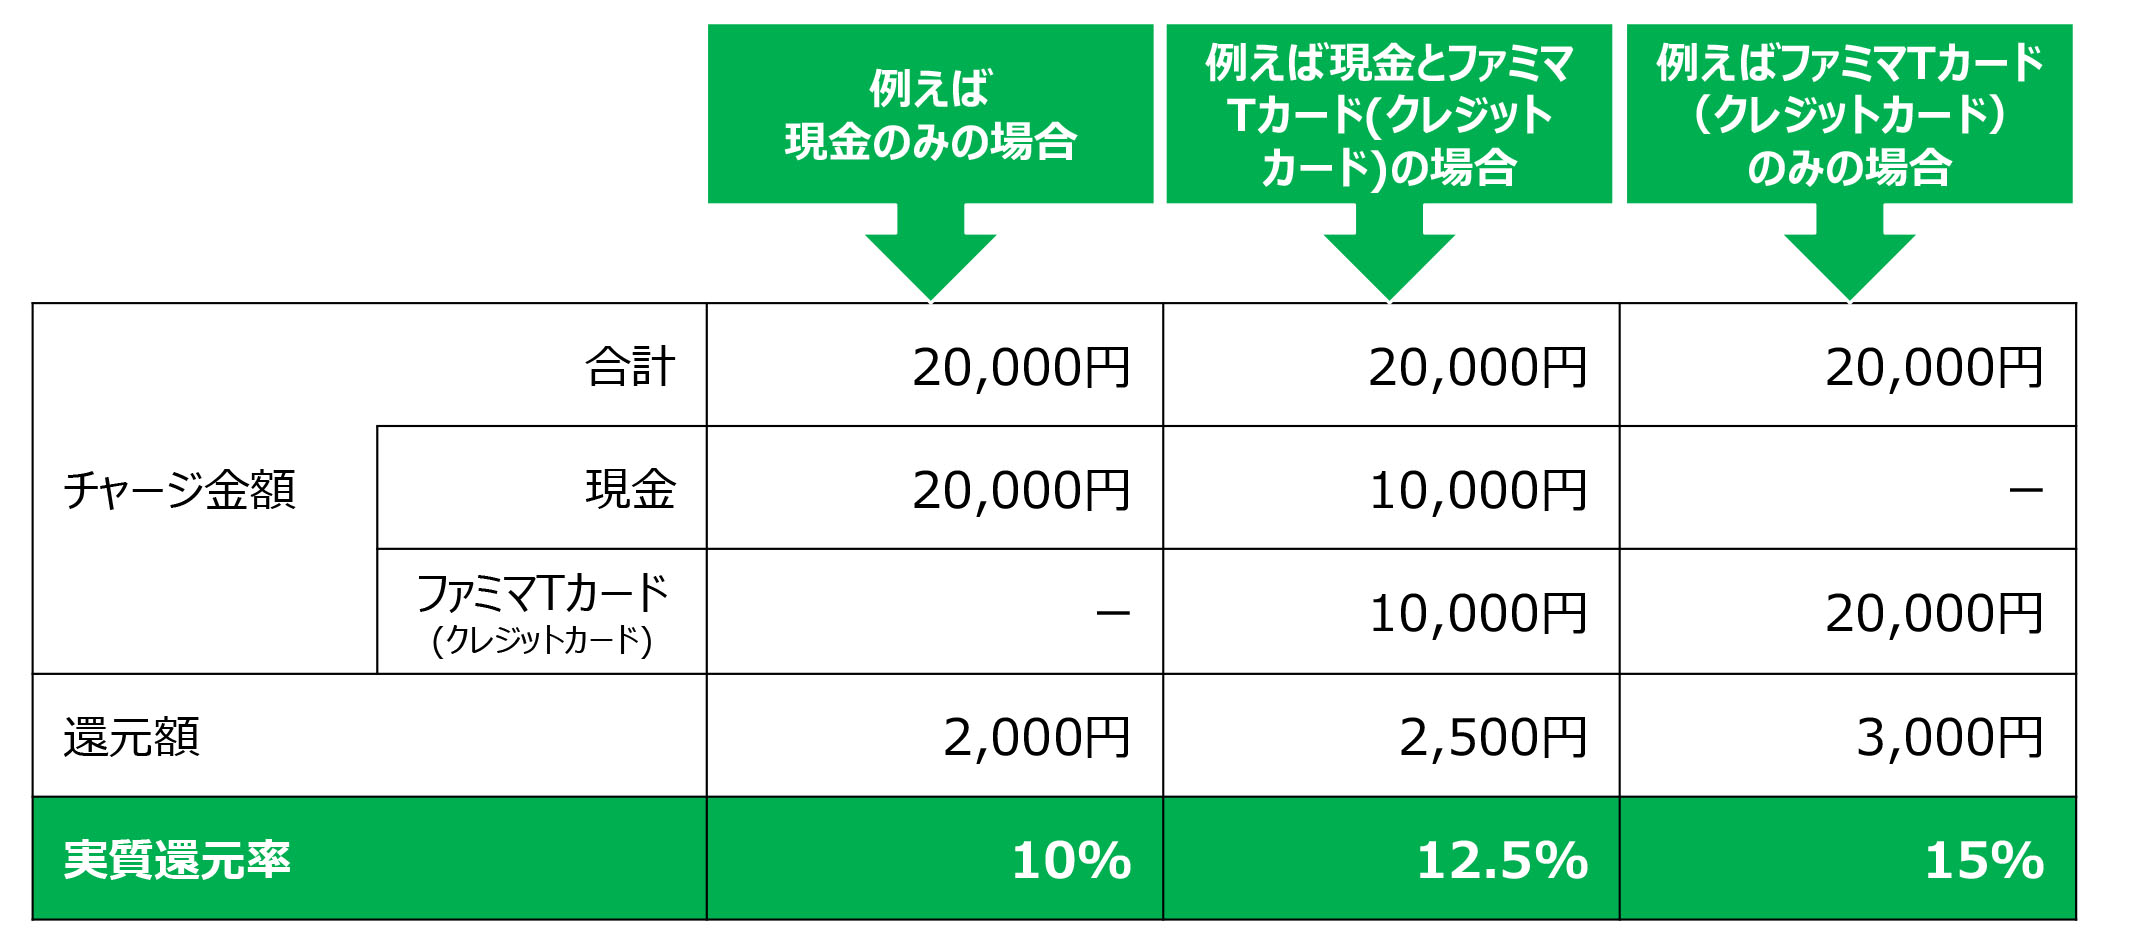 https://www.family.co.jp/content/dam/family/campaign/1907_famipay-bonus_cp/charge_pattern.jpg